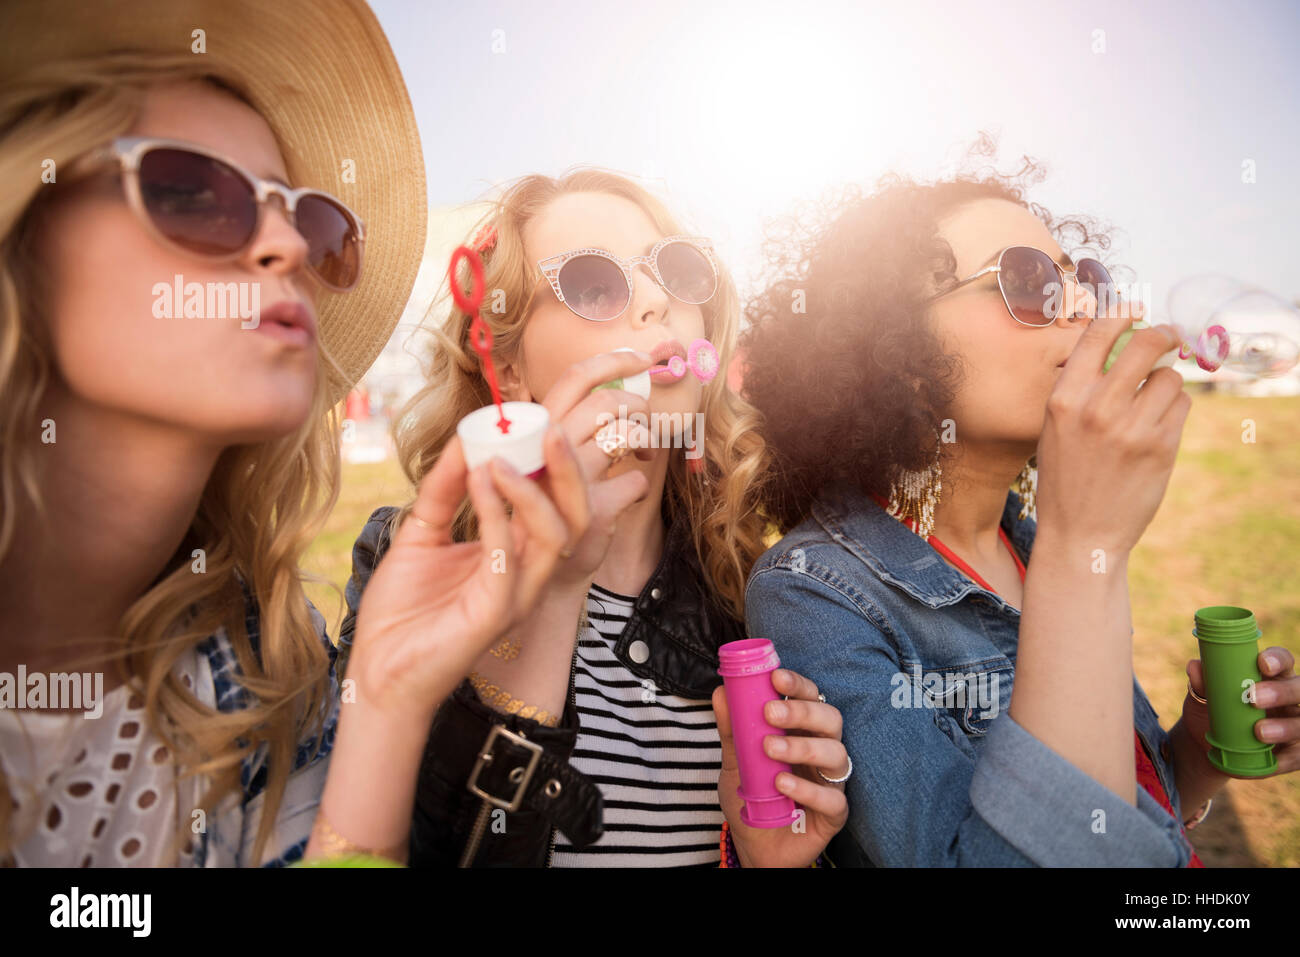 Girls feeling so free together Stock Photo